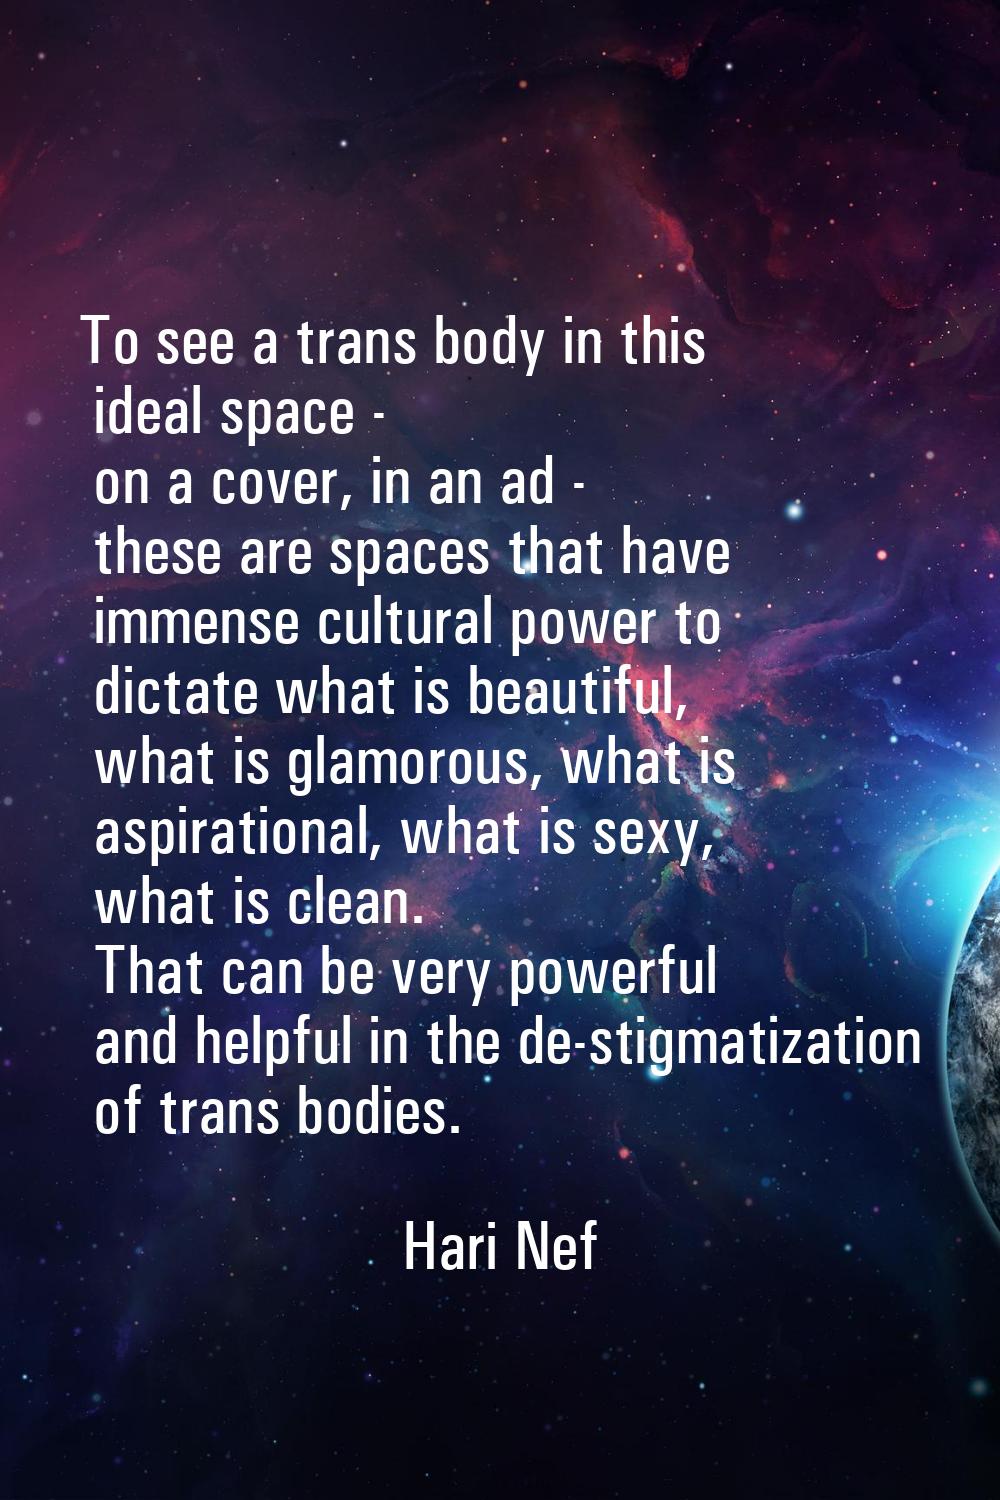 To see a trans body in this ideal space - on a cover, in an ad - these are spaces that have immense